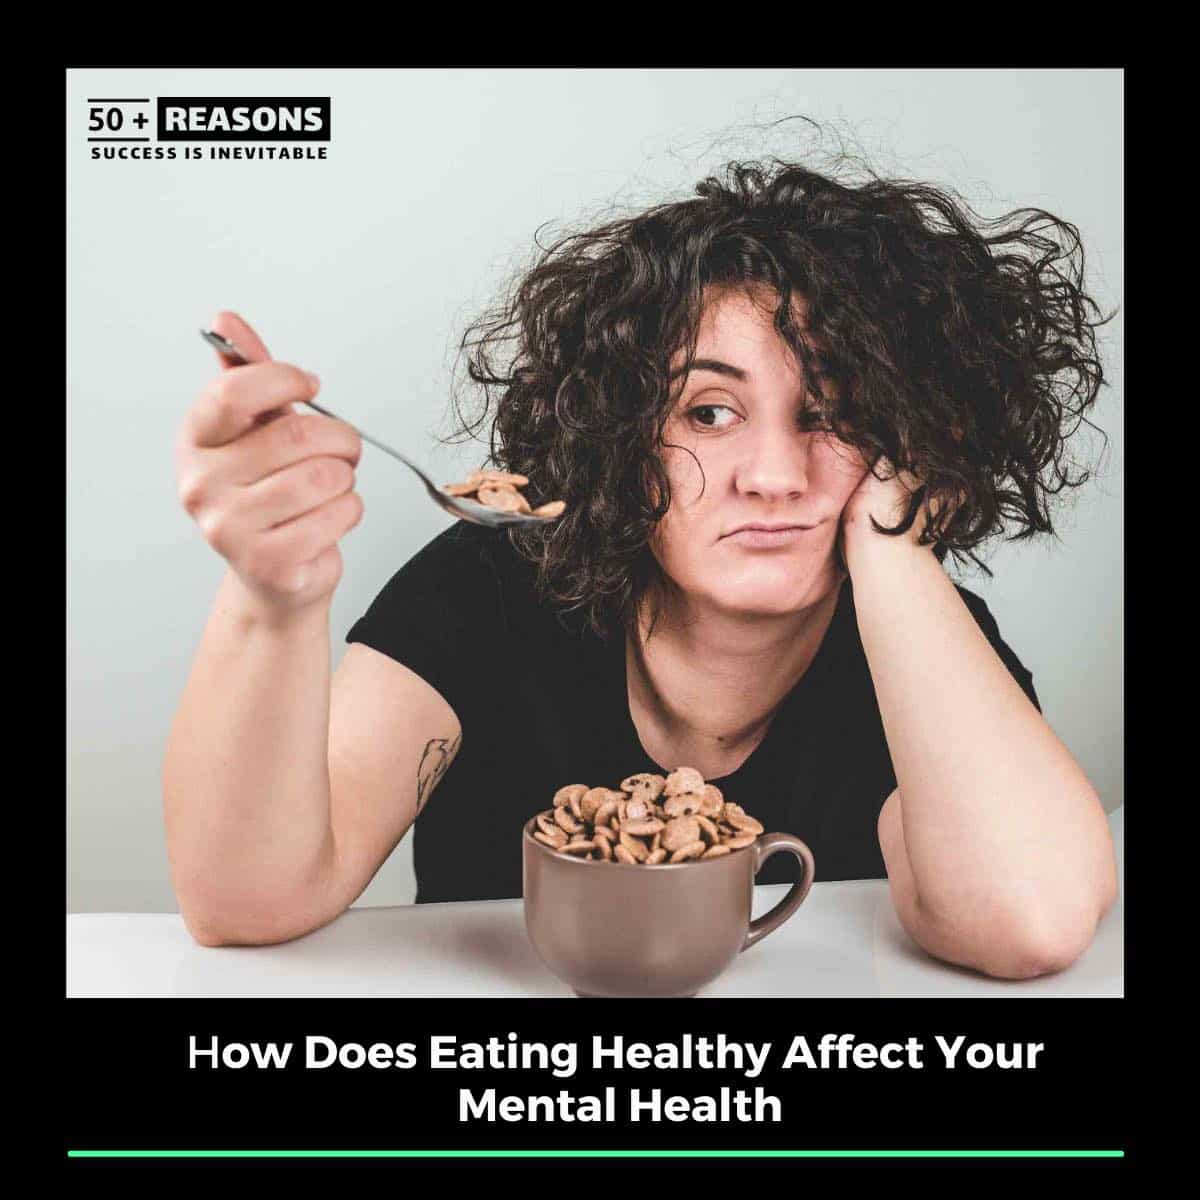 How Does Eating Healthy Affect Your Mental Health